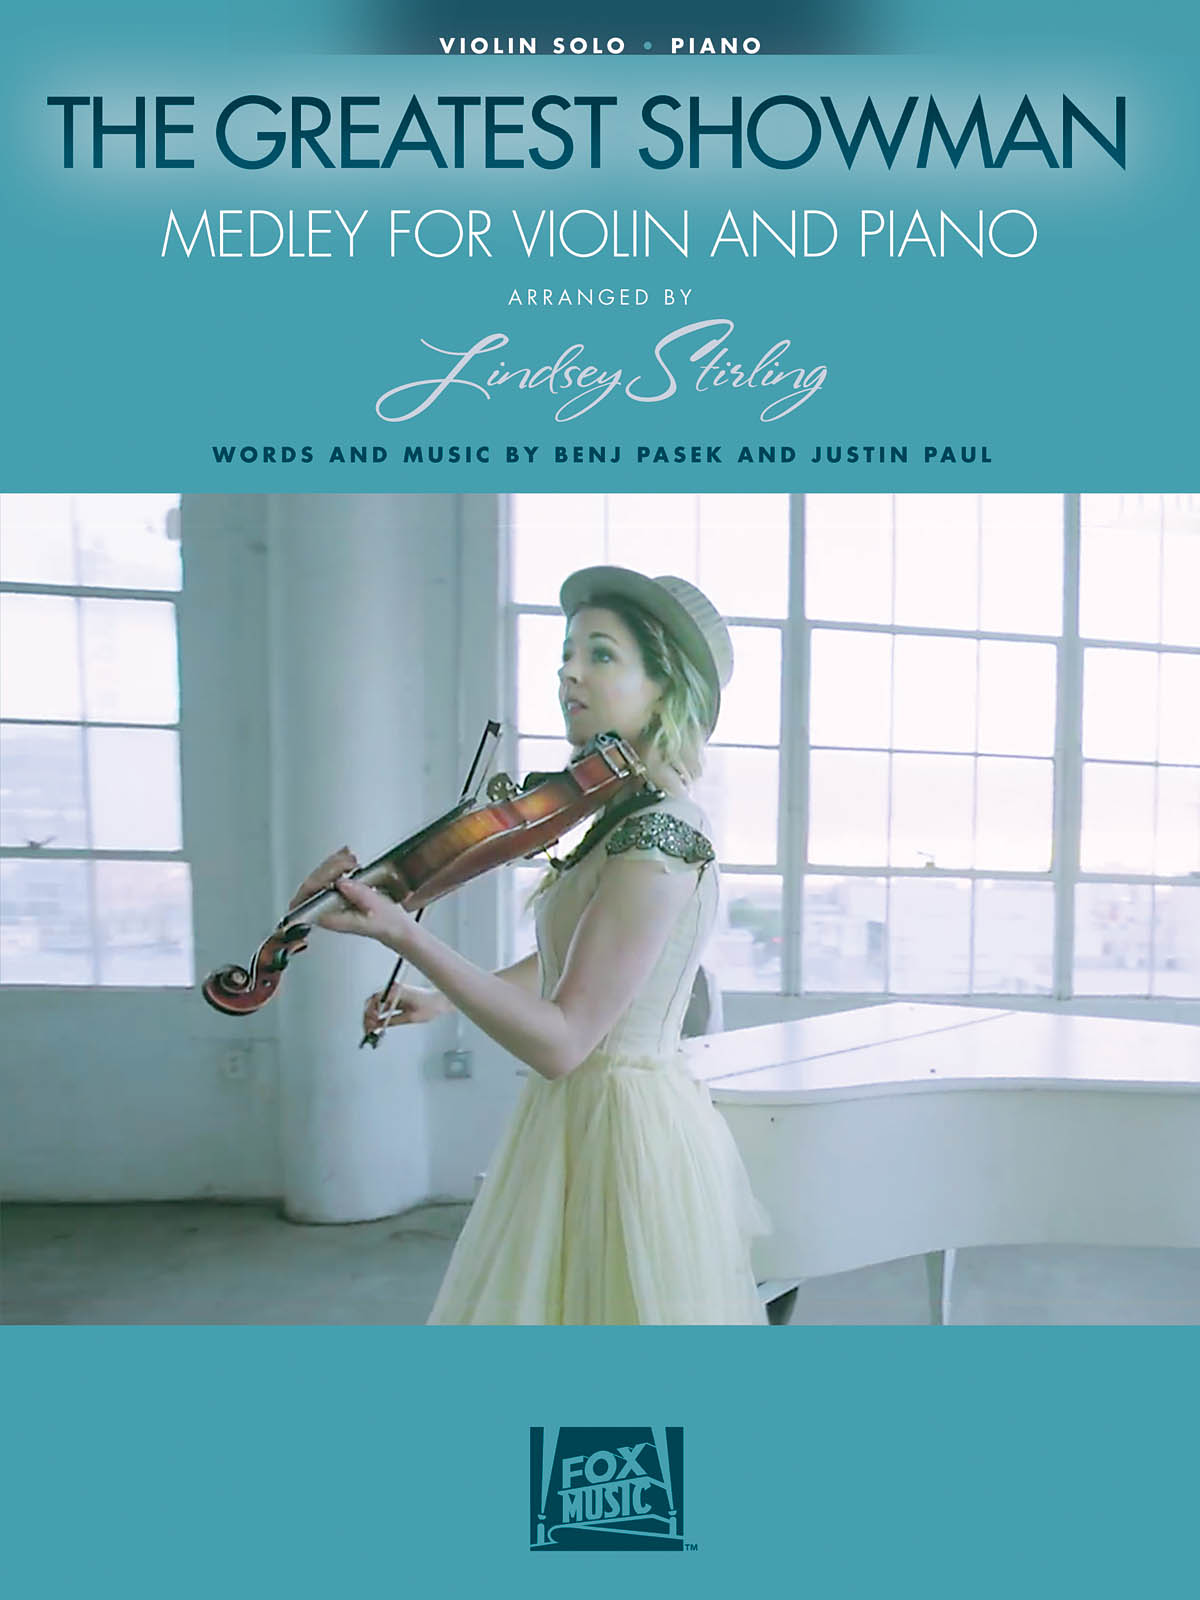 The Greatest Showman - Medley For Violin & Piano - Arranged by Lindsey Stirling for Violin and Piano